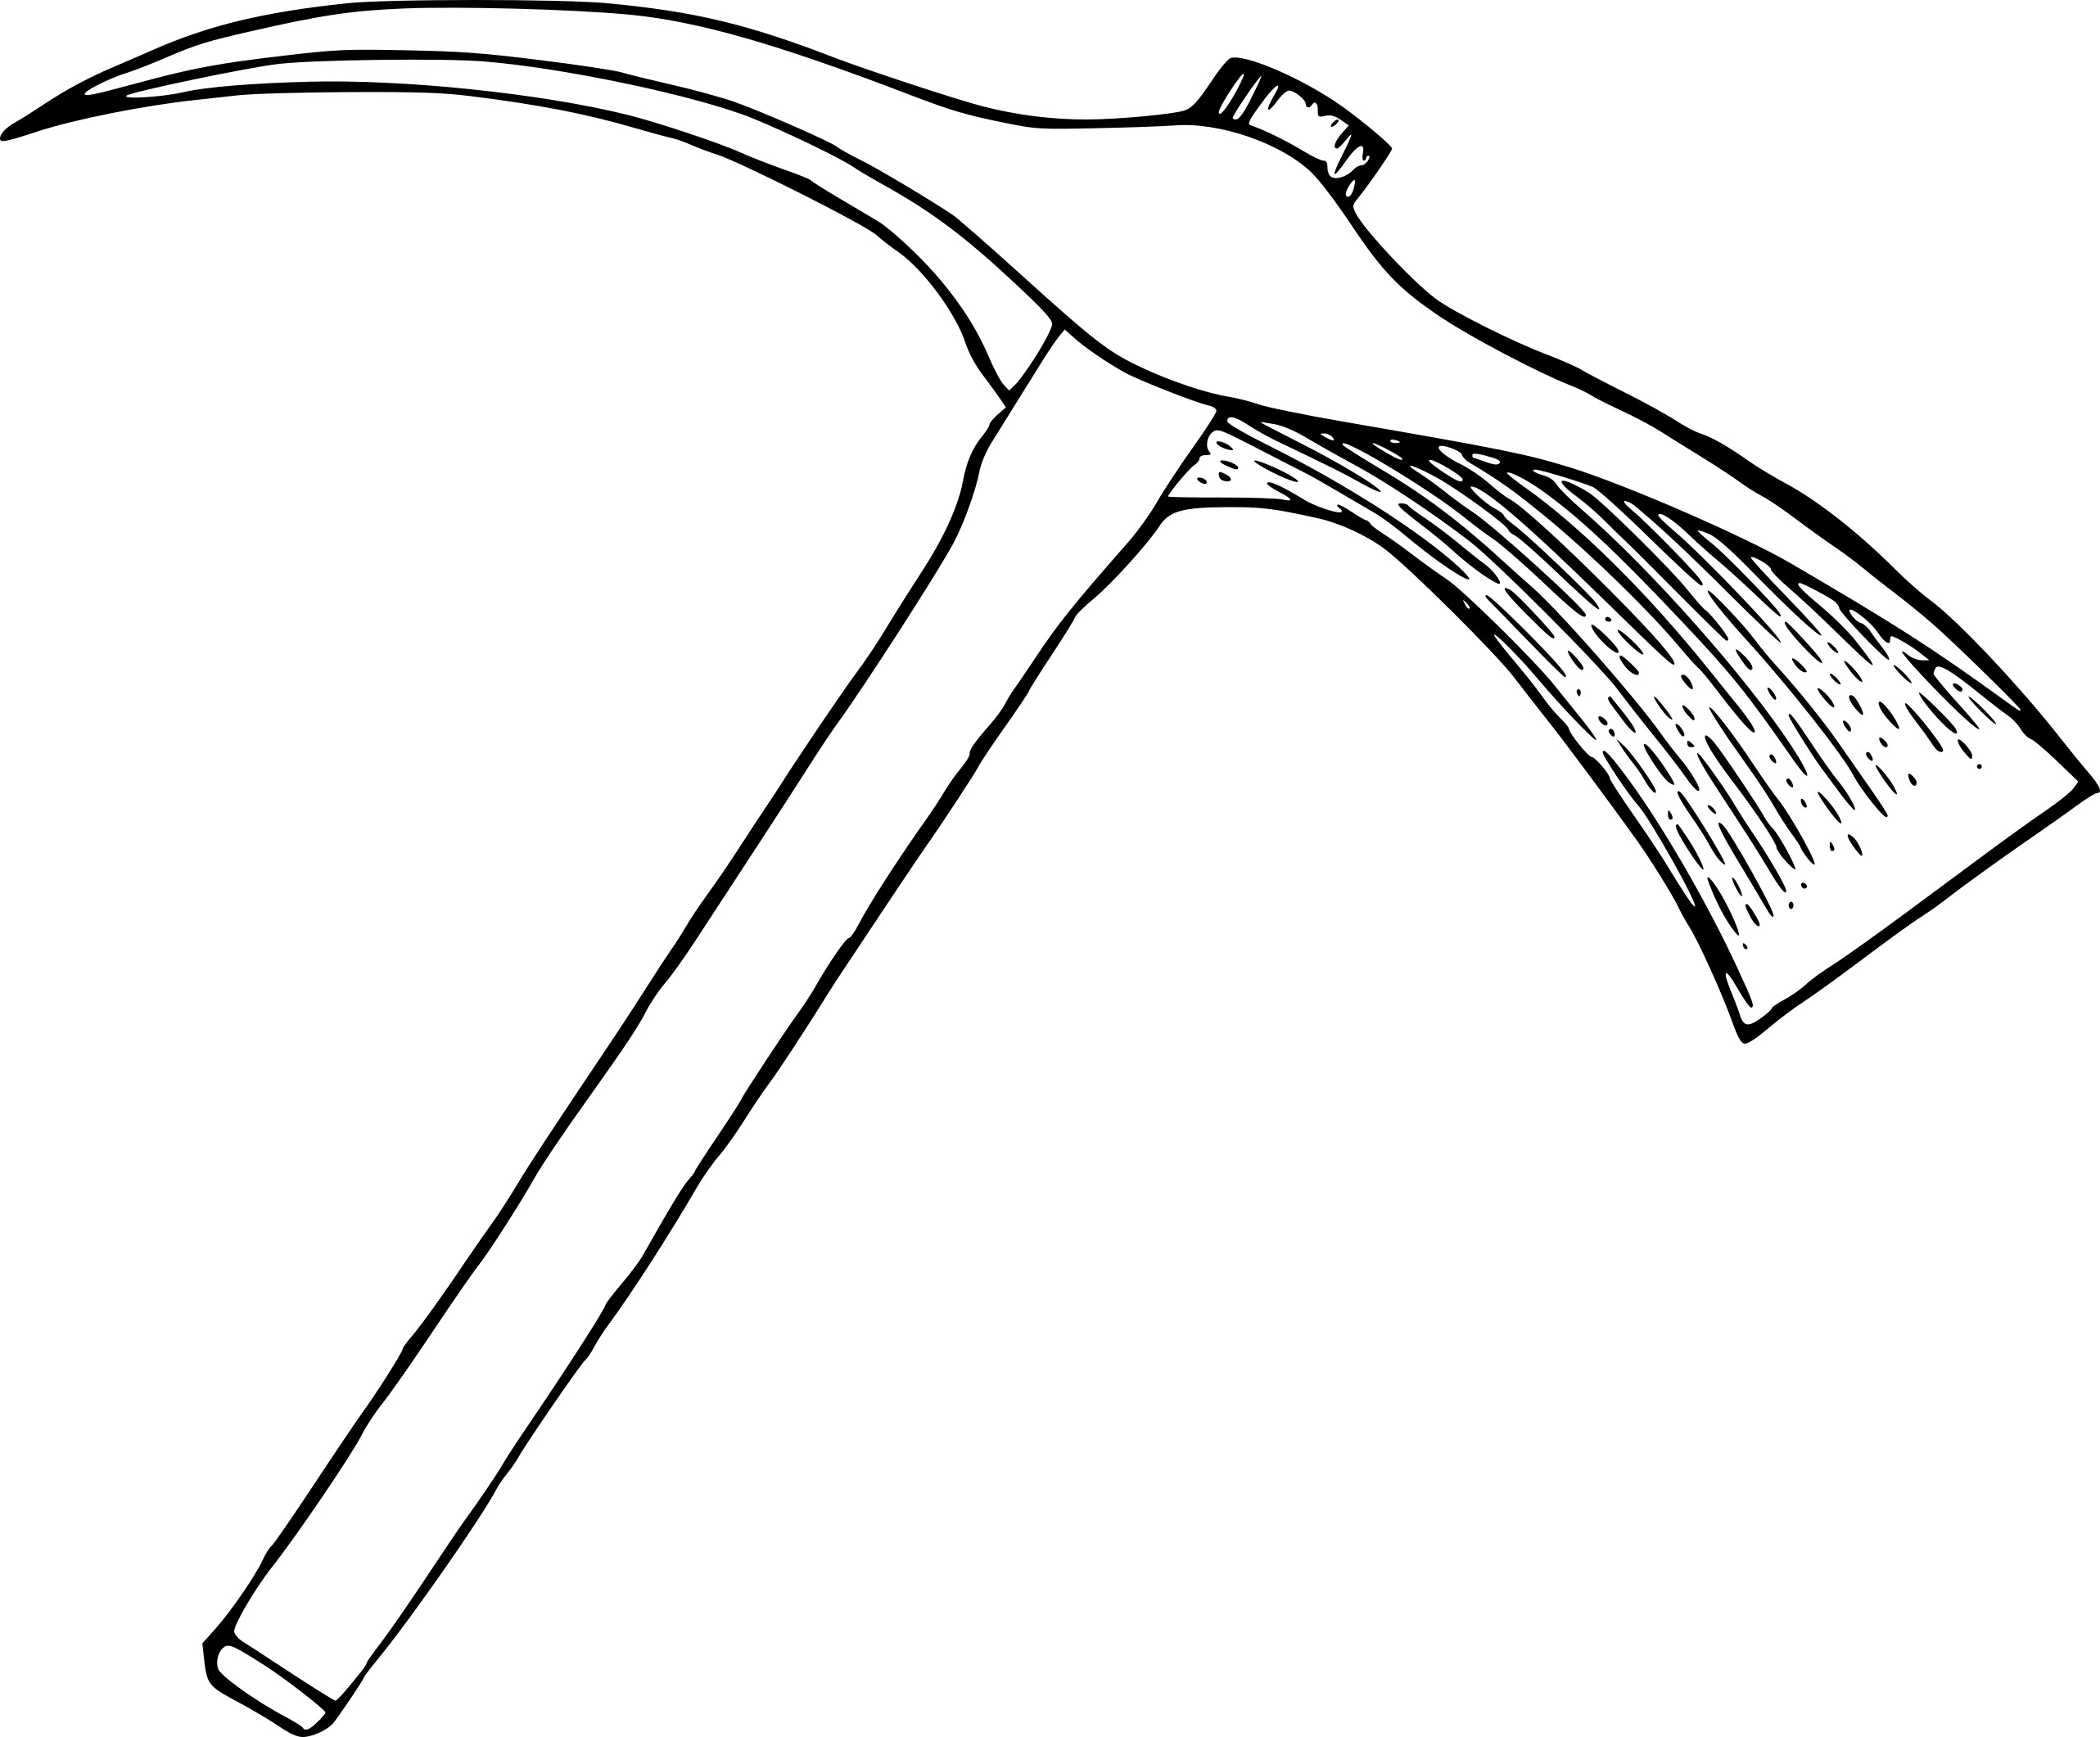 Pickaxe coloring page